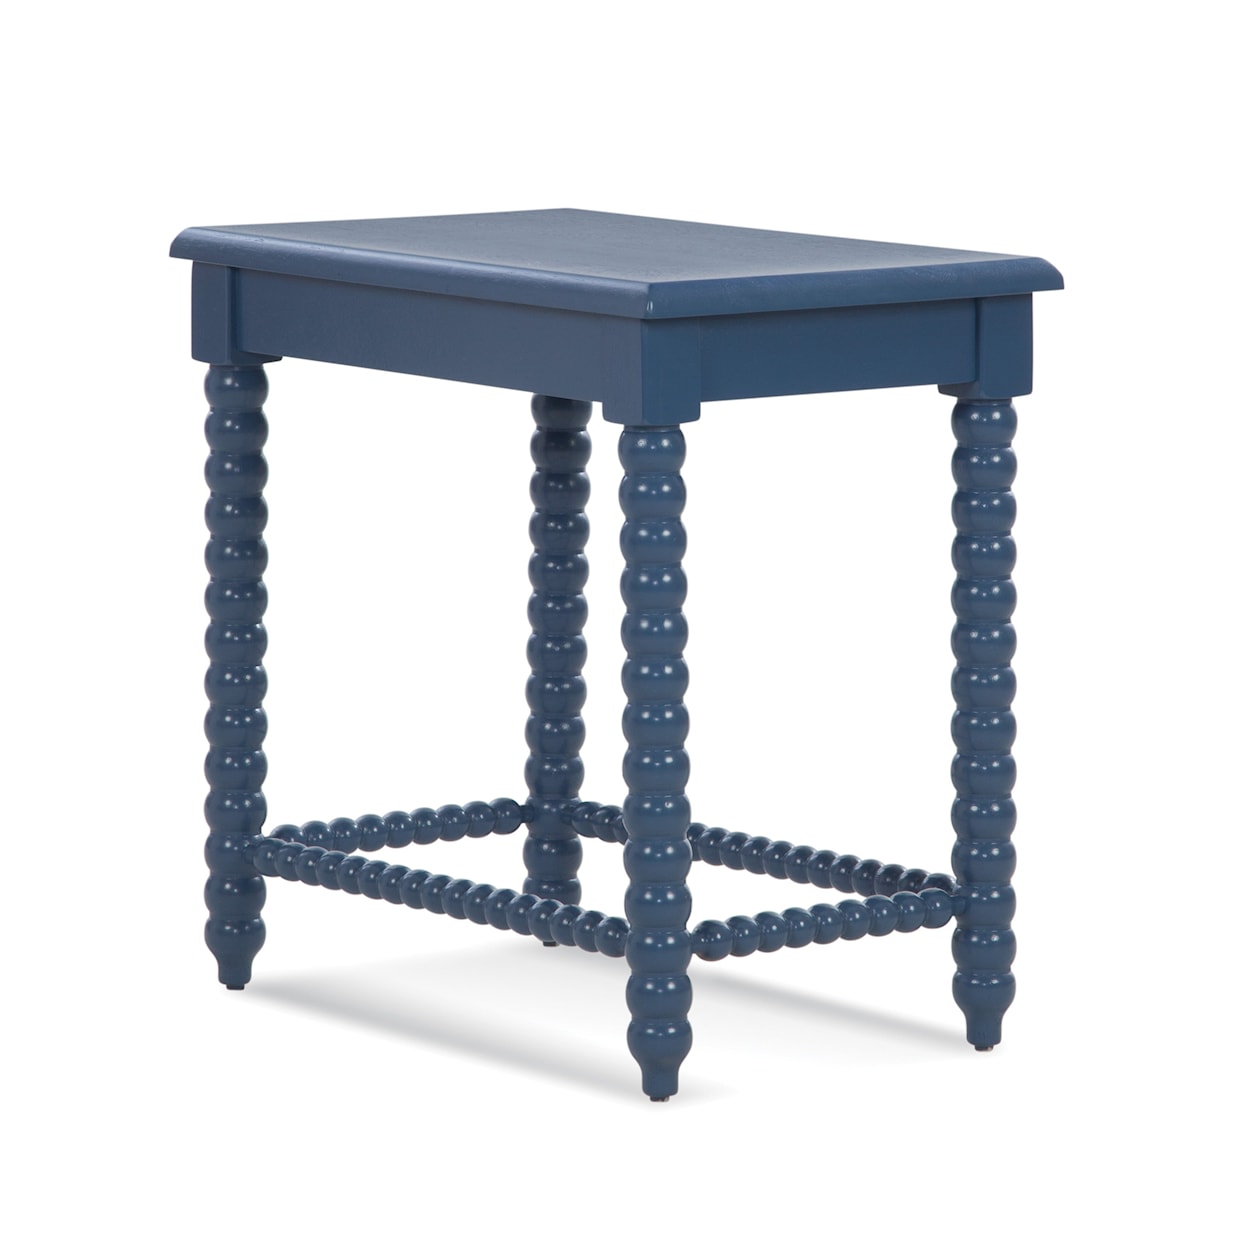 Braxton Culler Lind Island Chairside Table